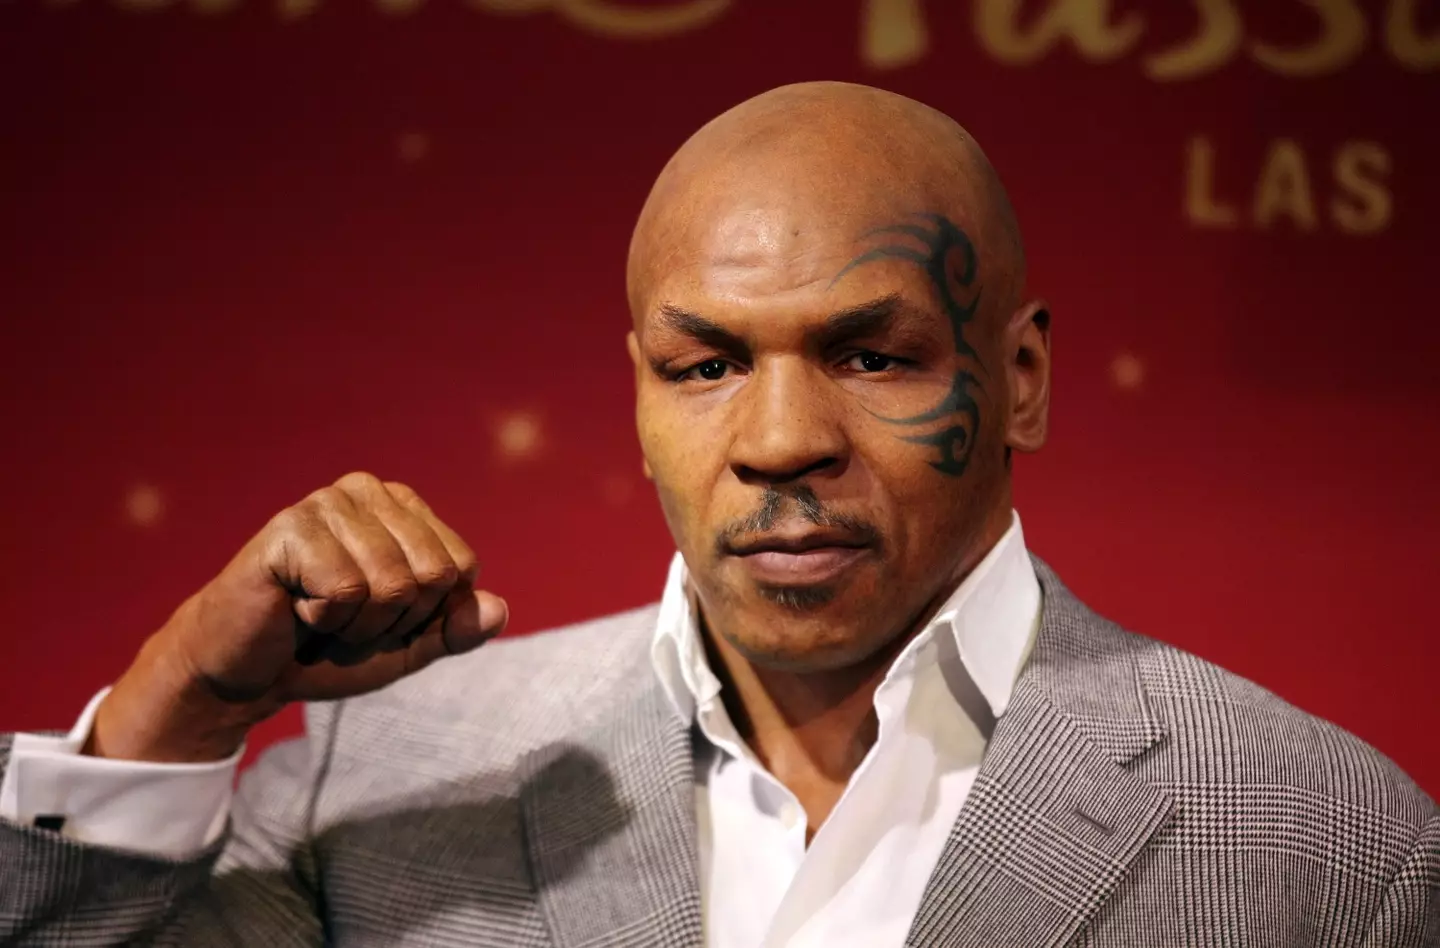 Mike Tyson has only just begun his fighting comeback.